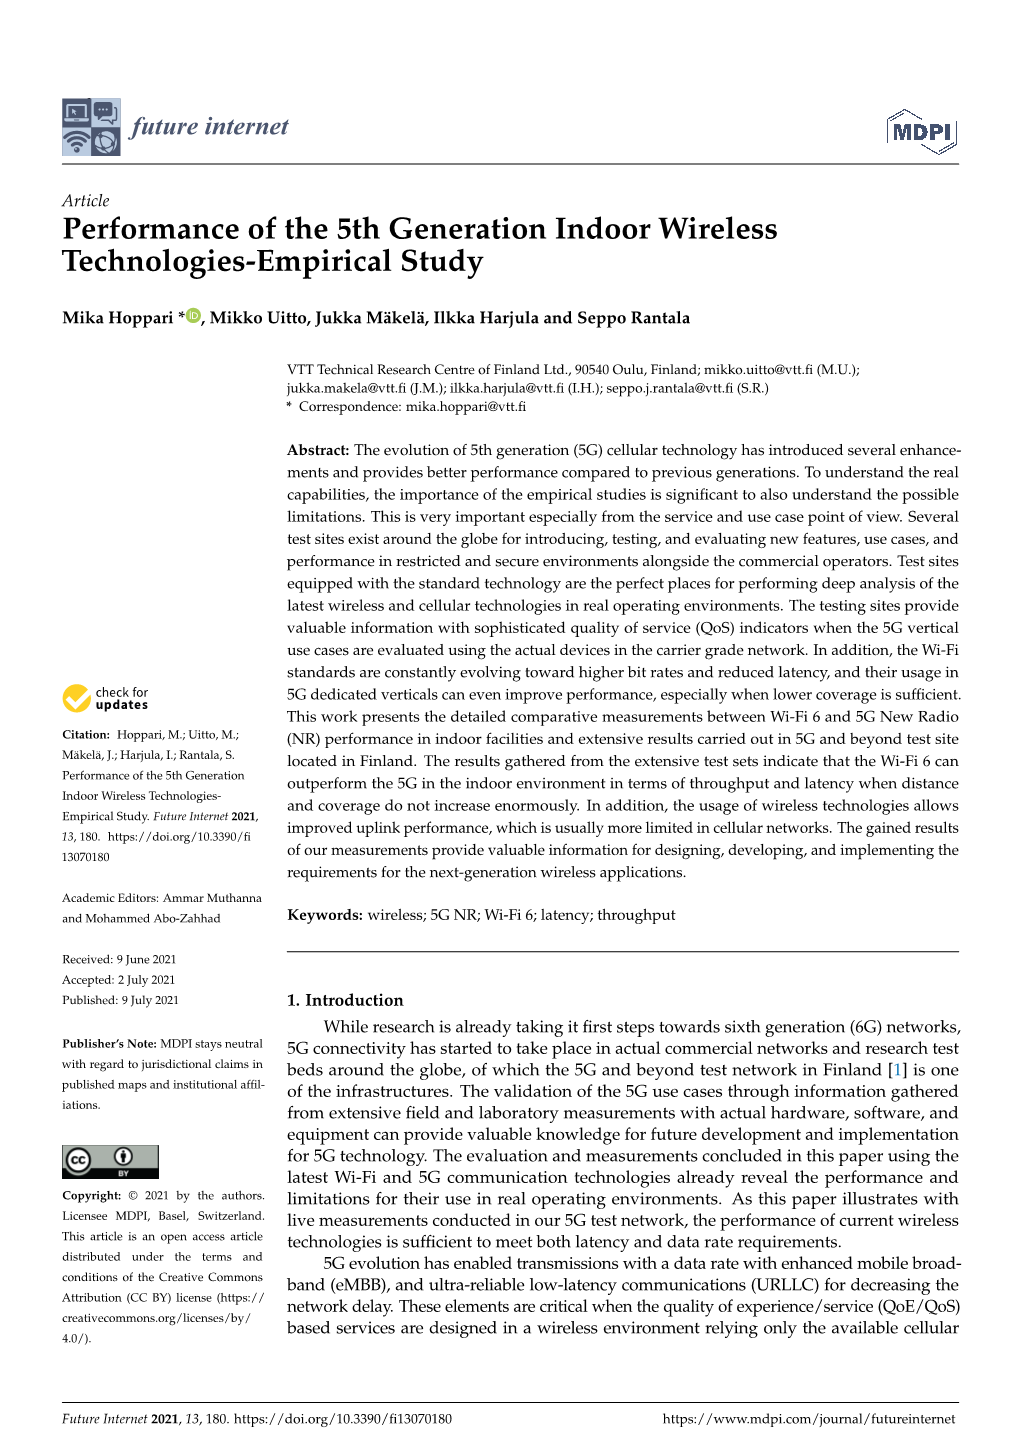 Performance of the 5Th Generation Indoor Wireless Technologies-Empirical Study